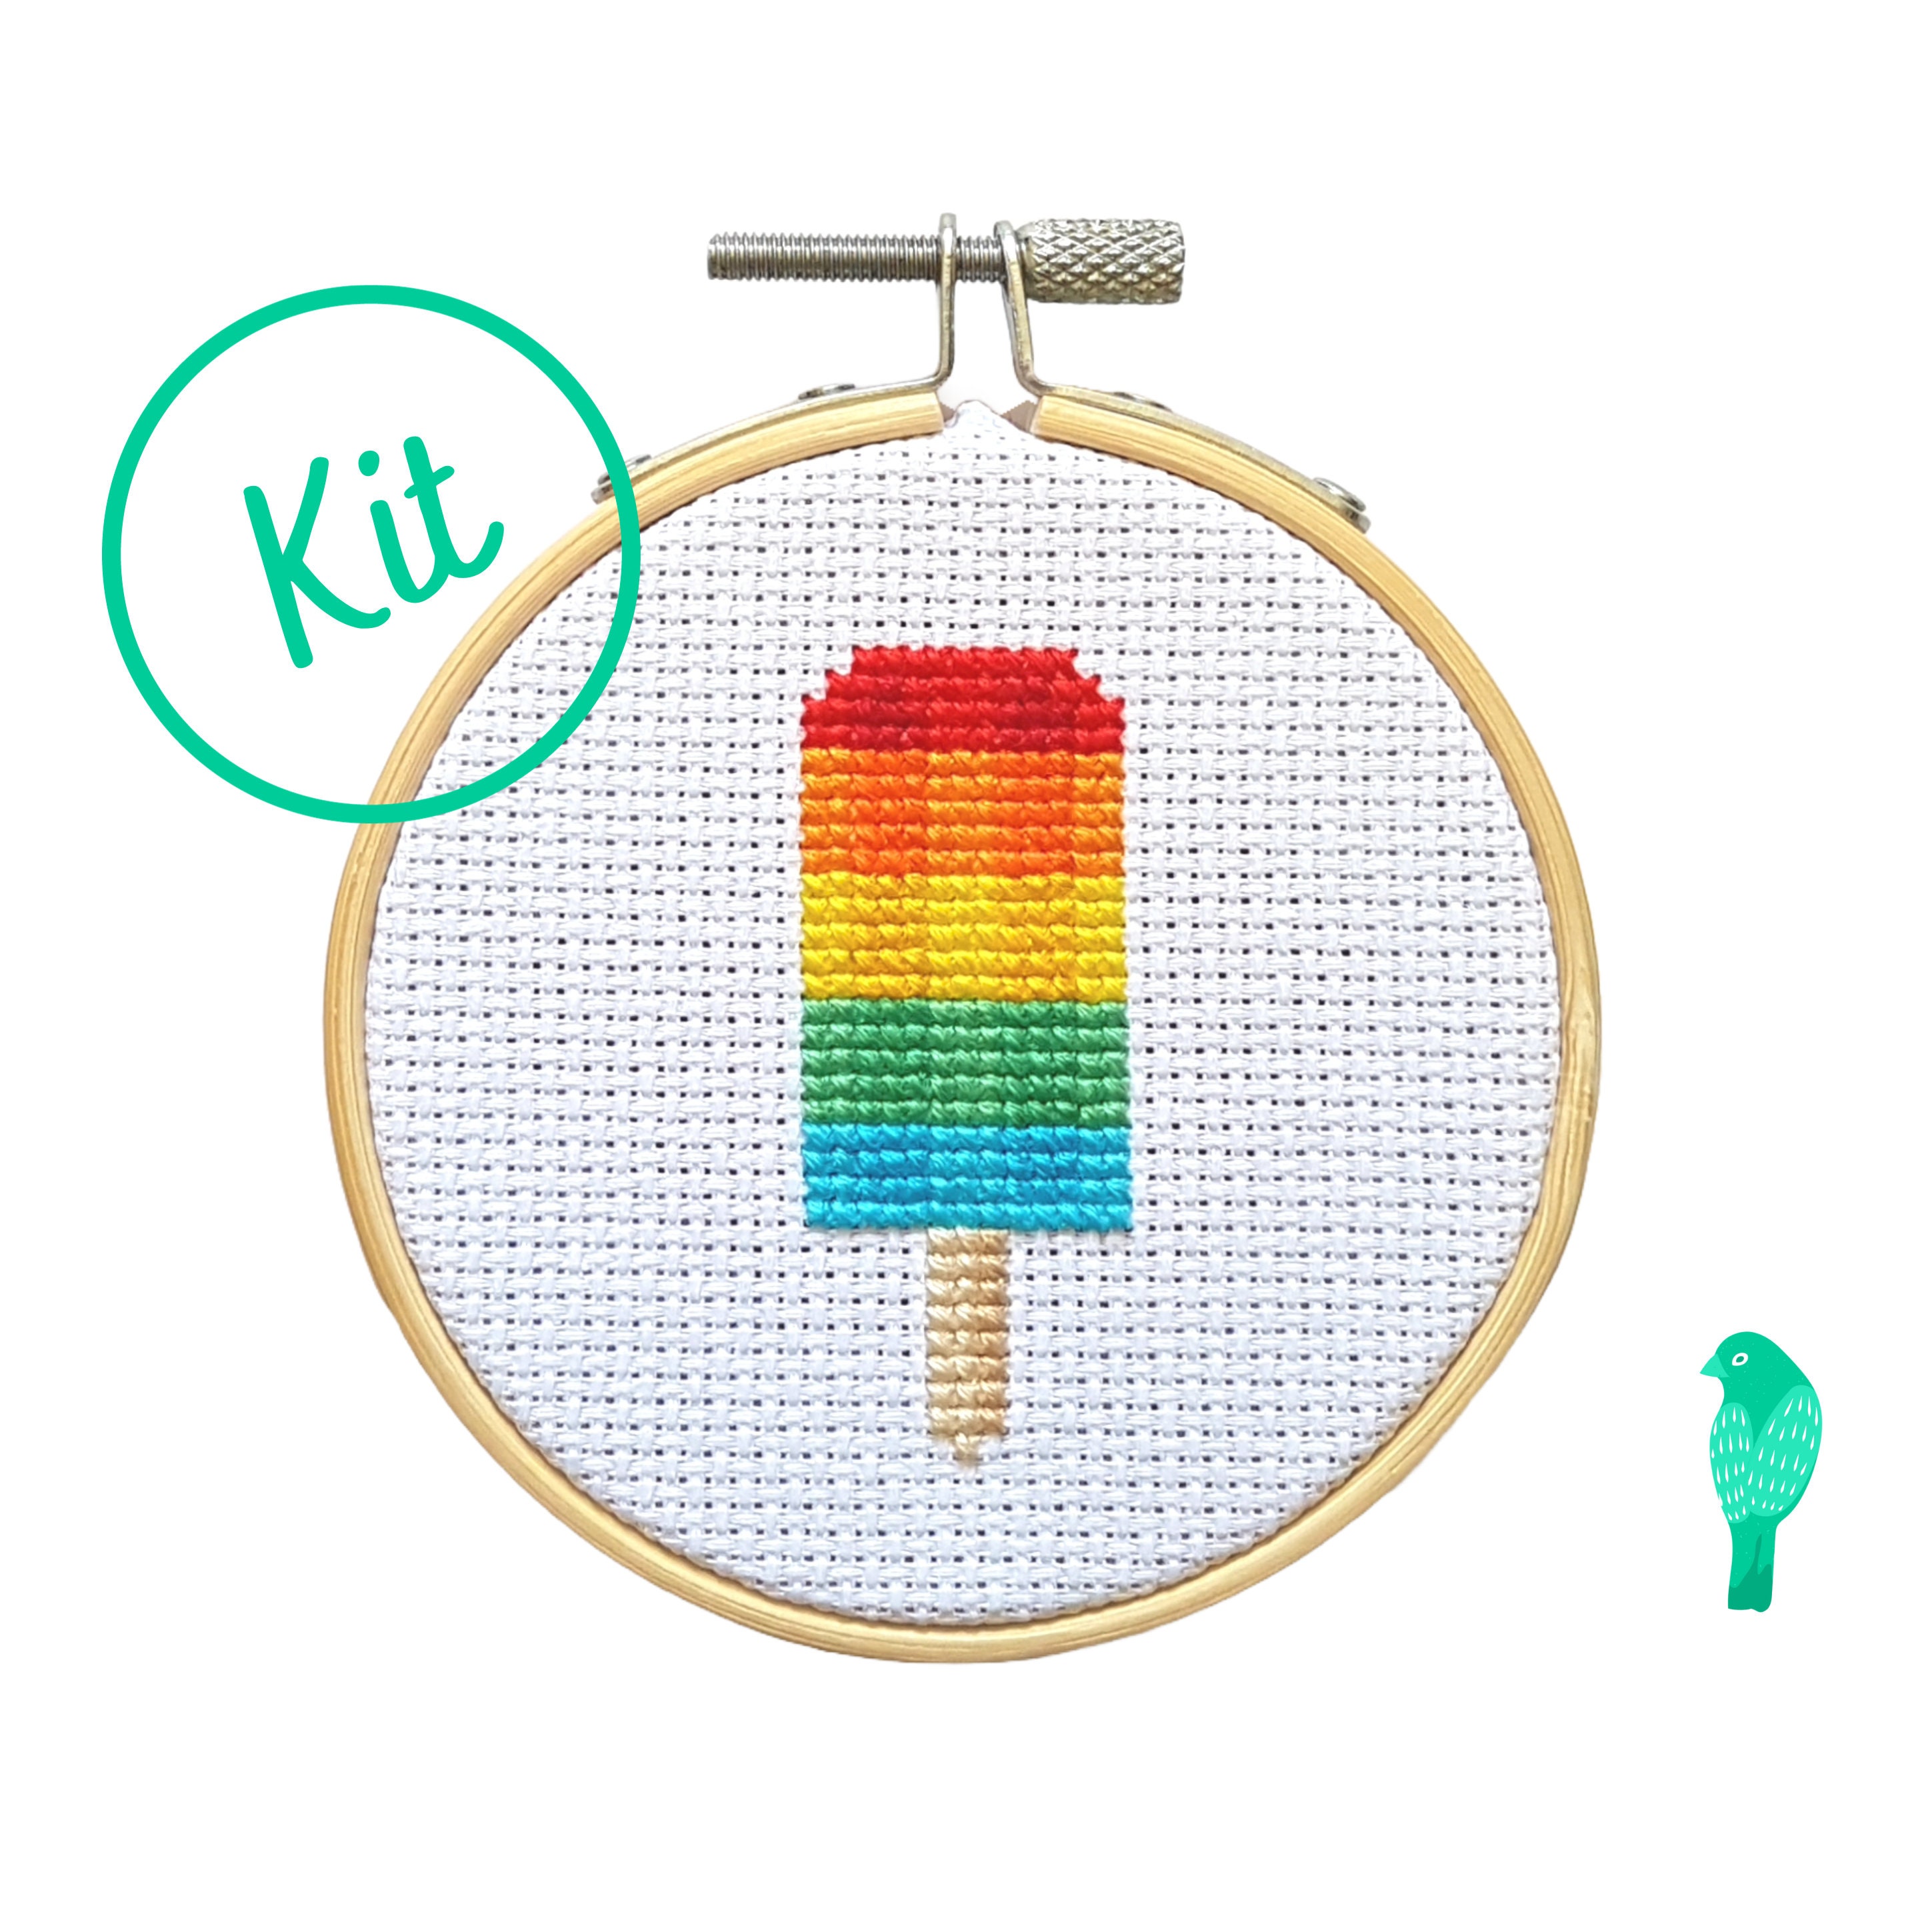 Cross Stitch Kits for Beginners 